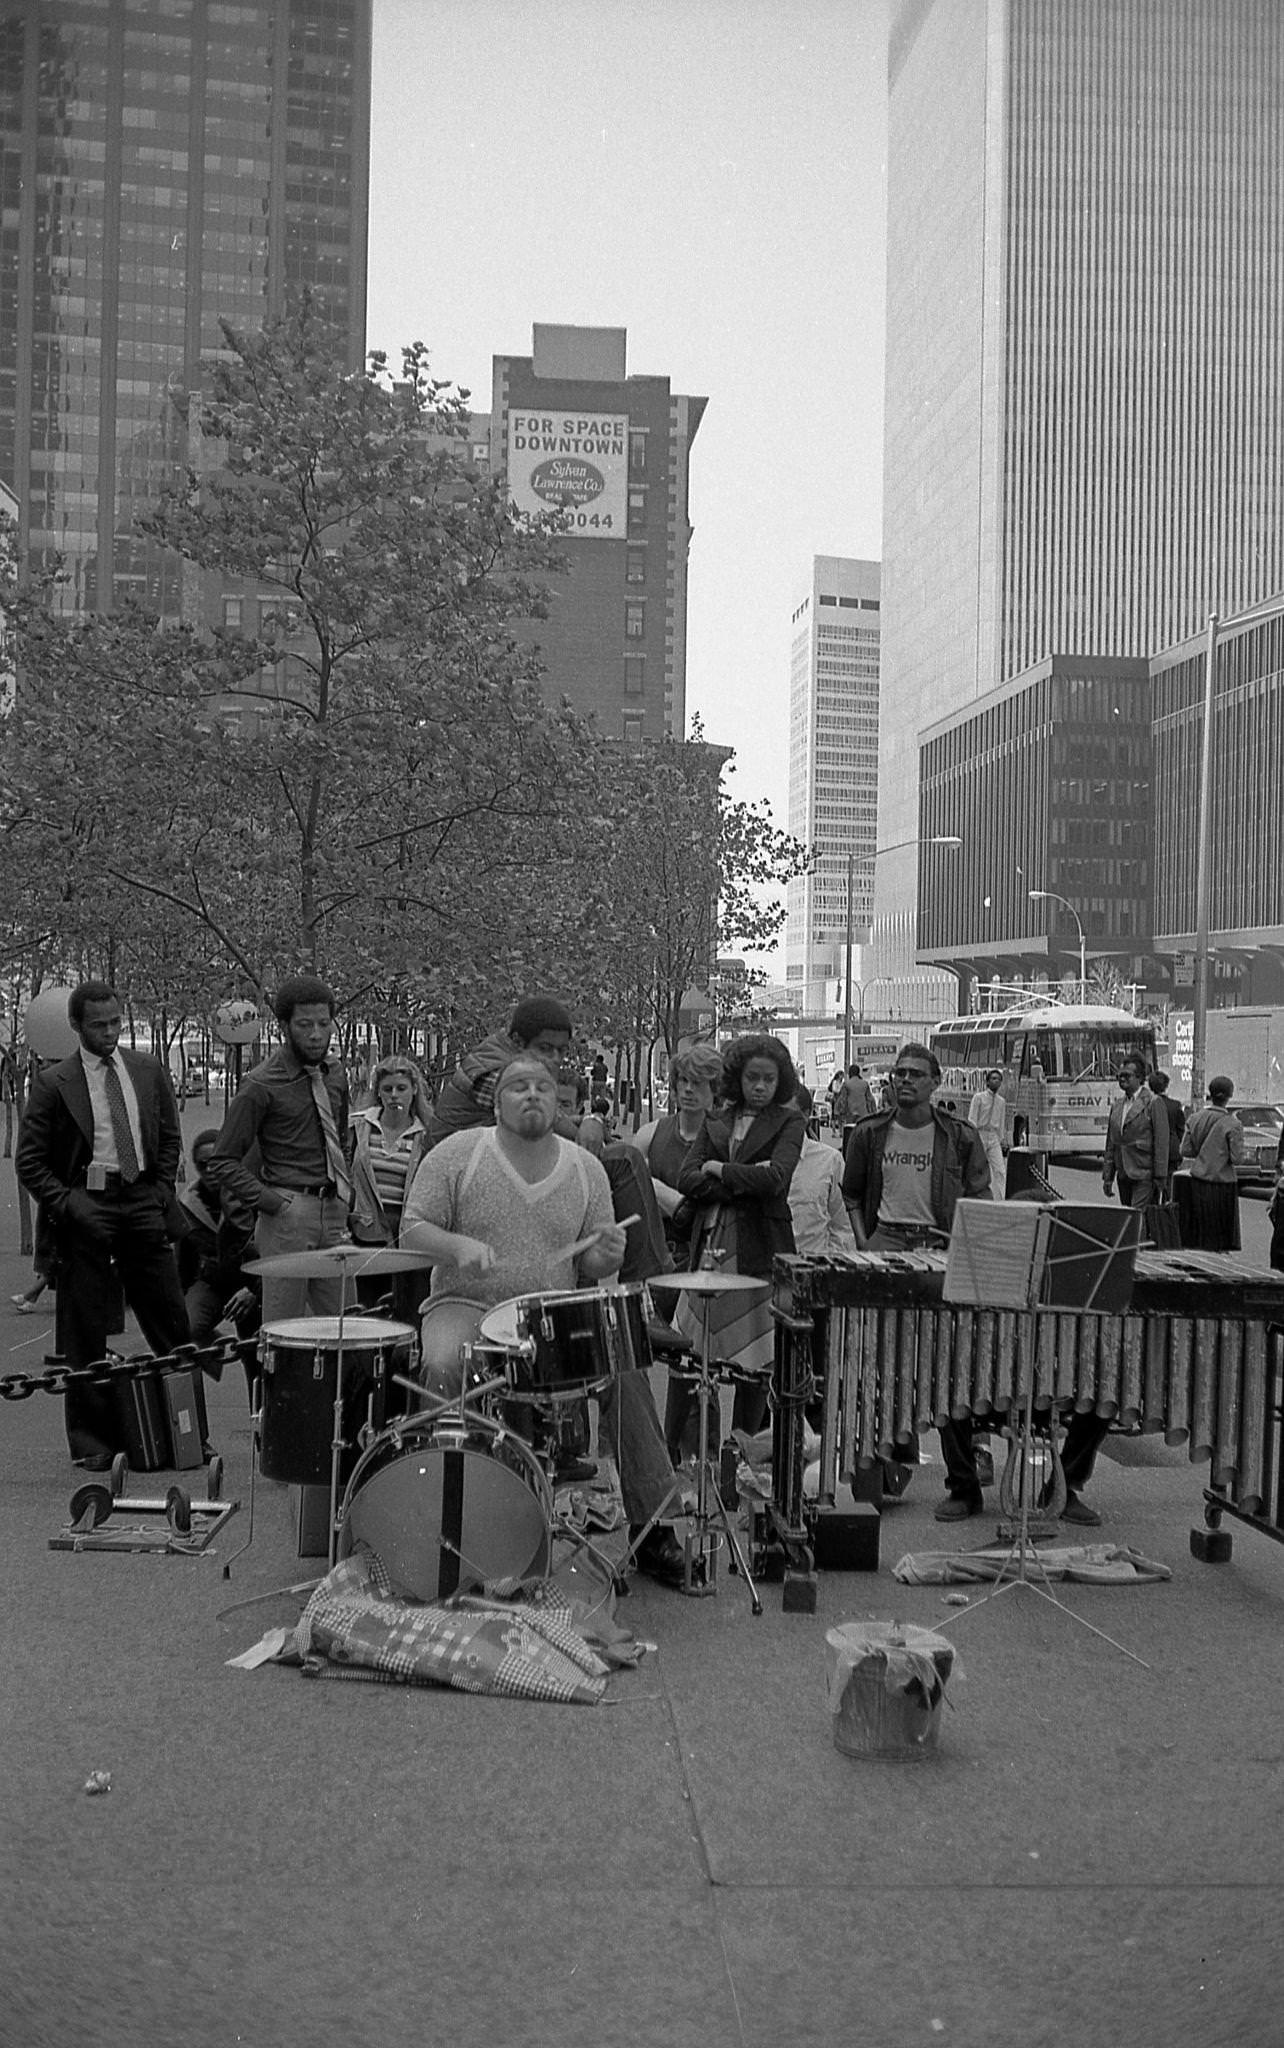 Street Musician In Liberty Plaza Park, Unidentified Street Musician Playing Drums, Manhattan, 1982